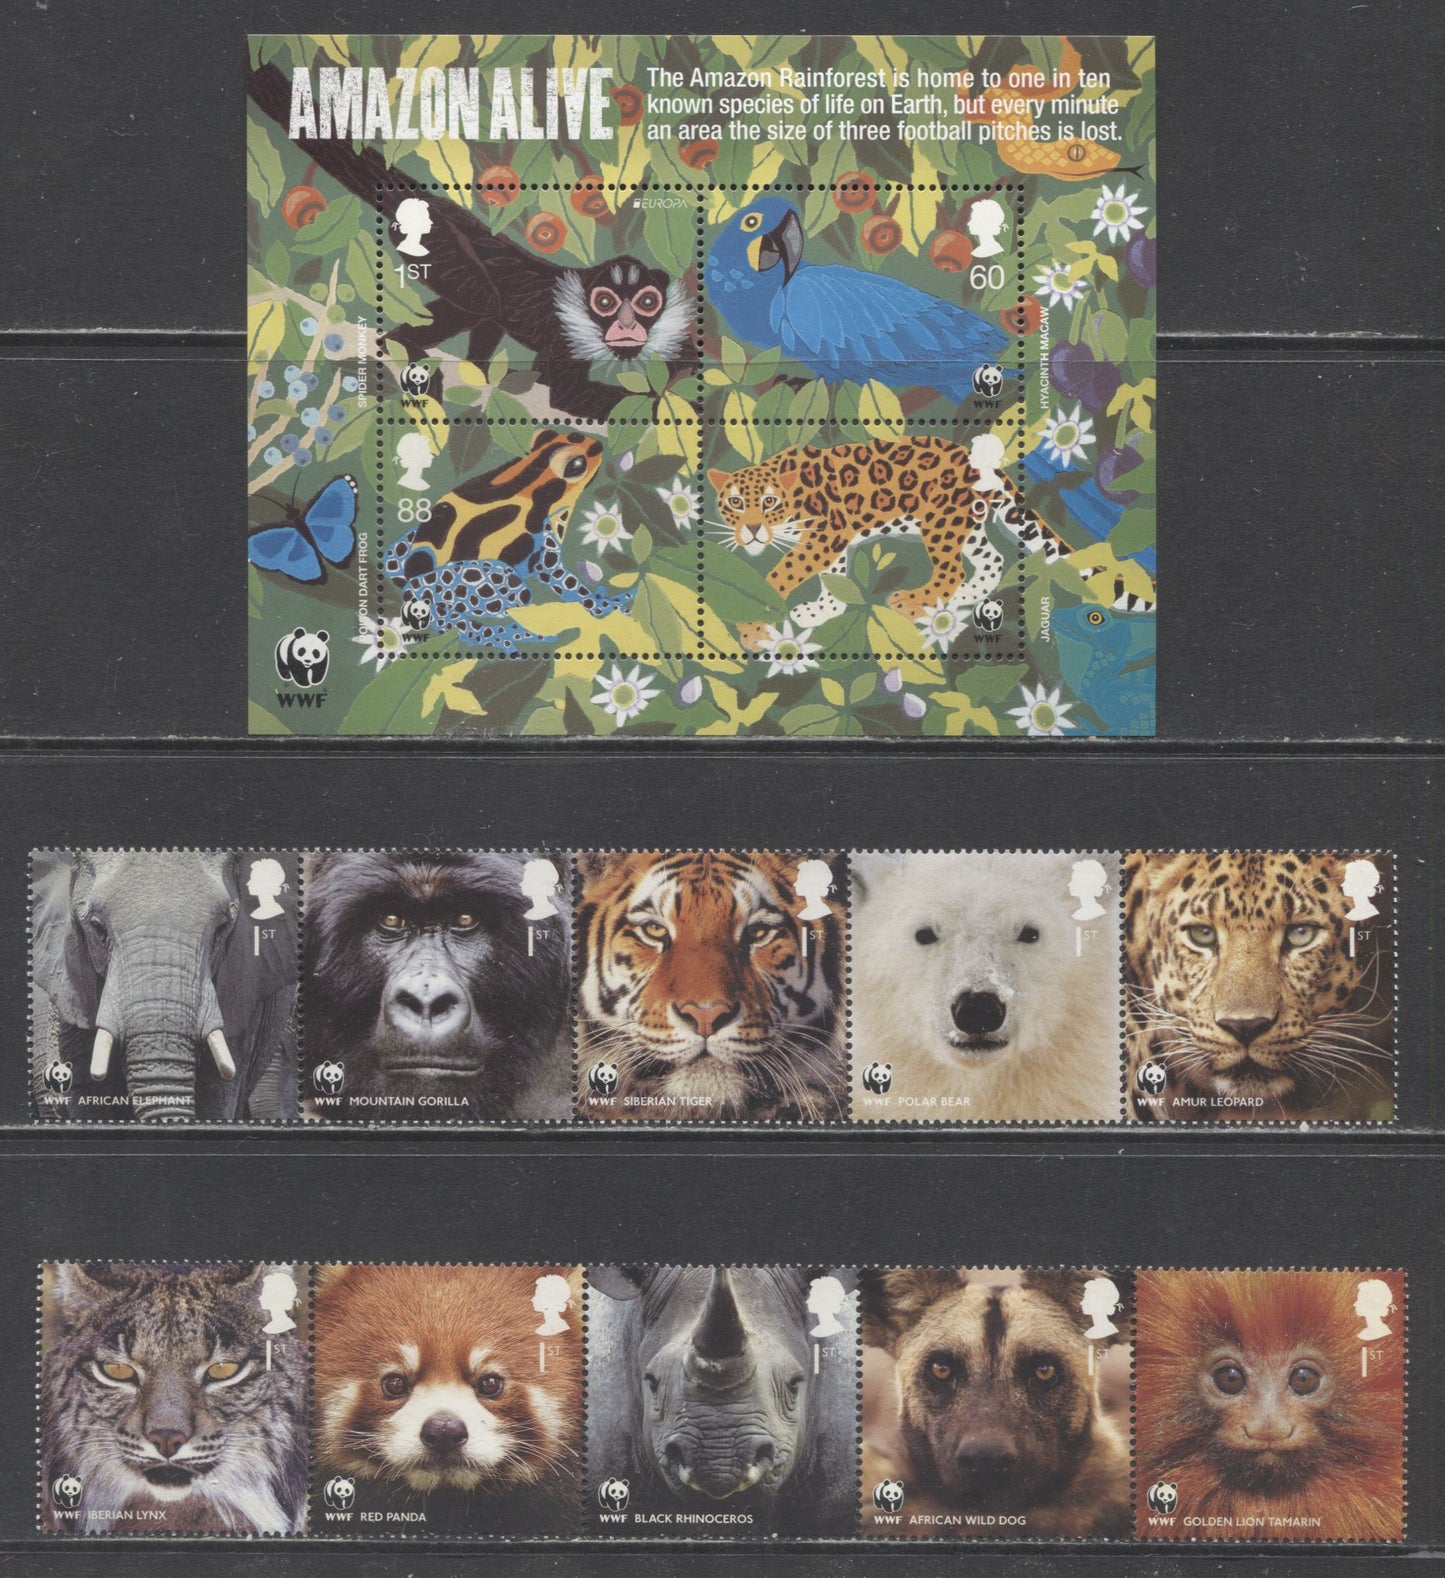 Lot 25 Great Britain SC#2887a-2863 2011 WWF 50th Anniversary & Amazon Alive Issues, 3 VFNH Strips Of 5 & Souvenir Sheet, Click on Listing to See ALL Pictures, 2017 Scott Cat. $30.5